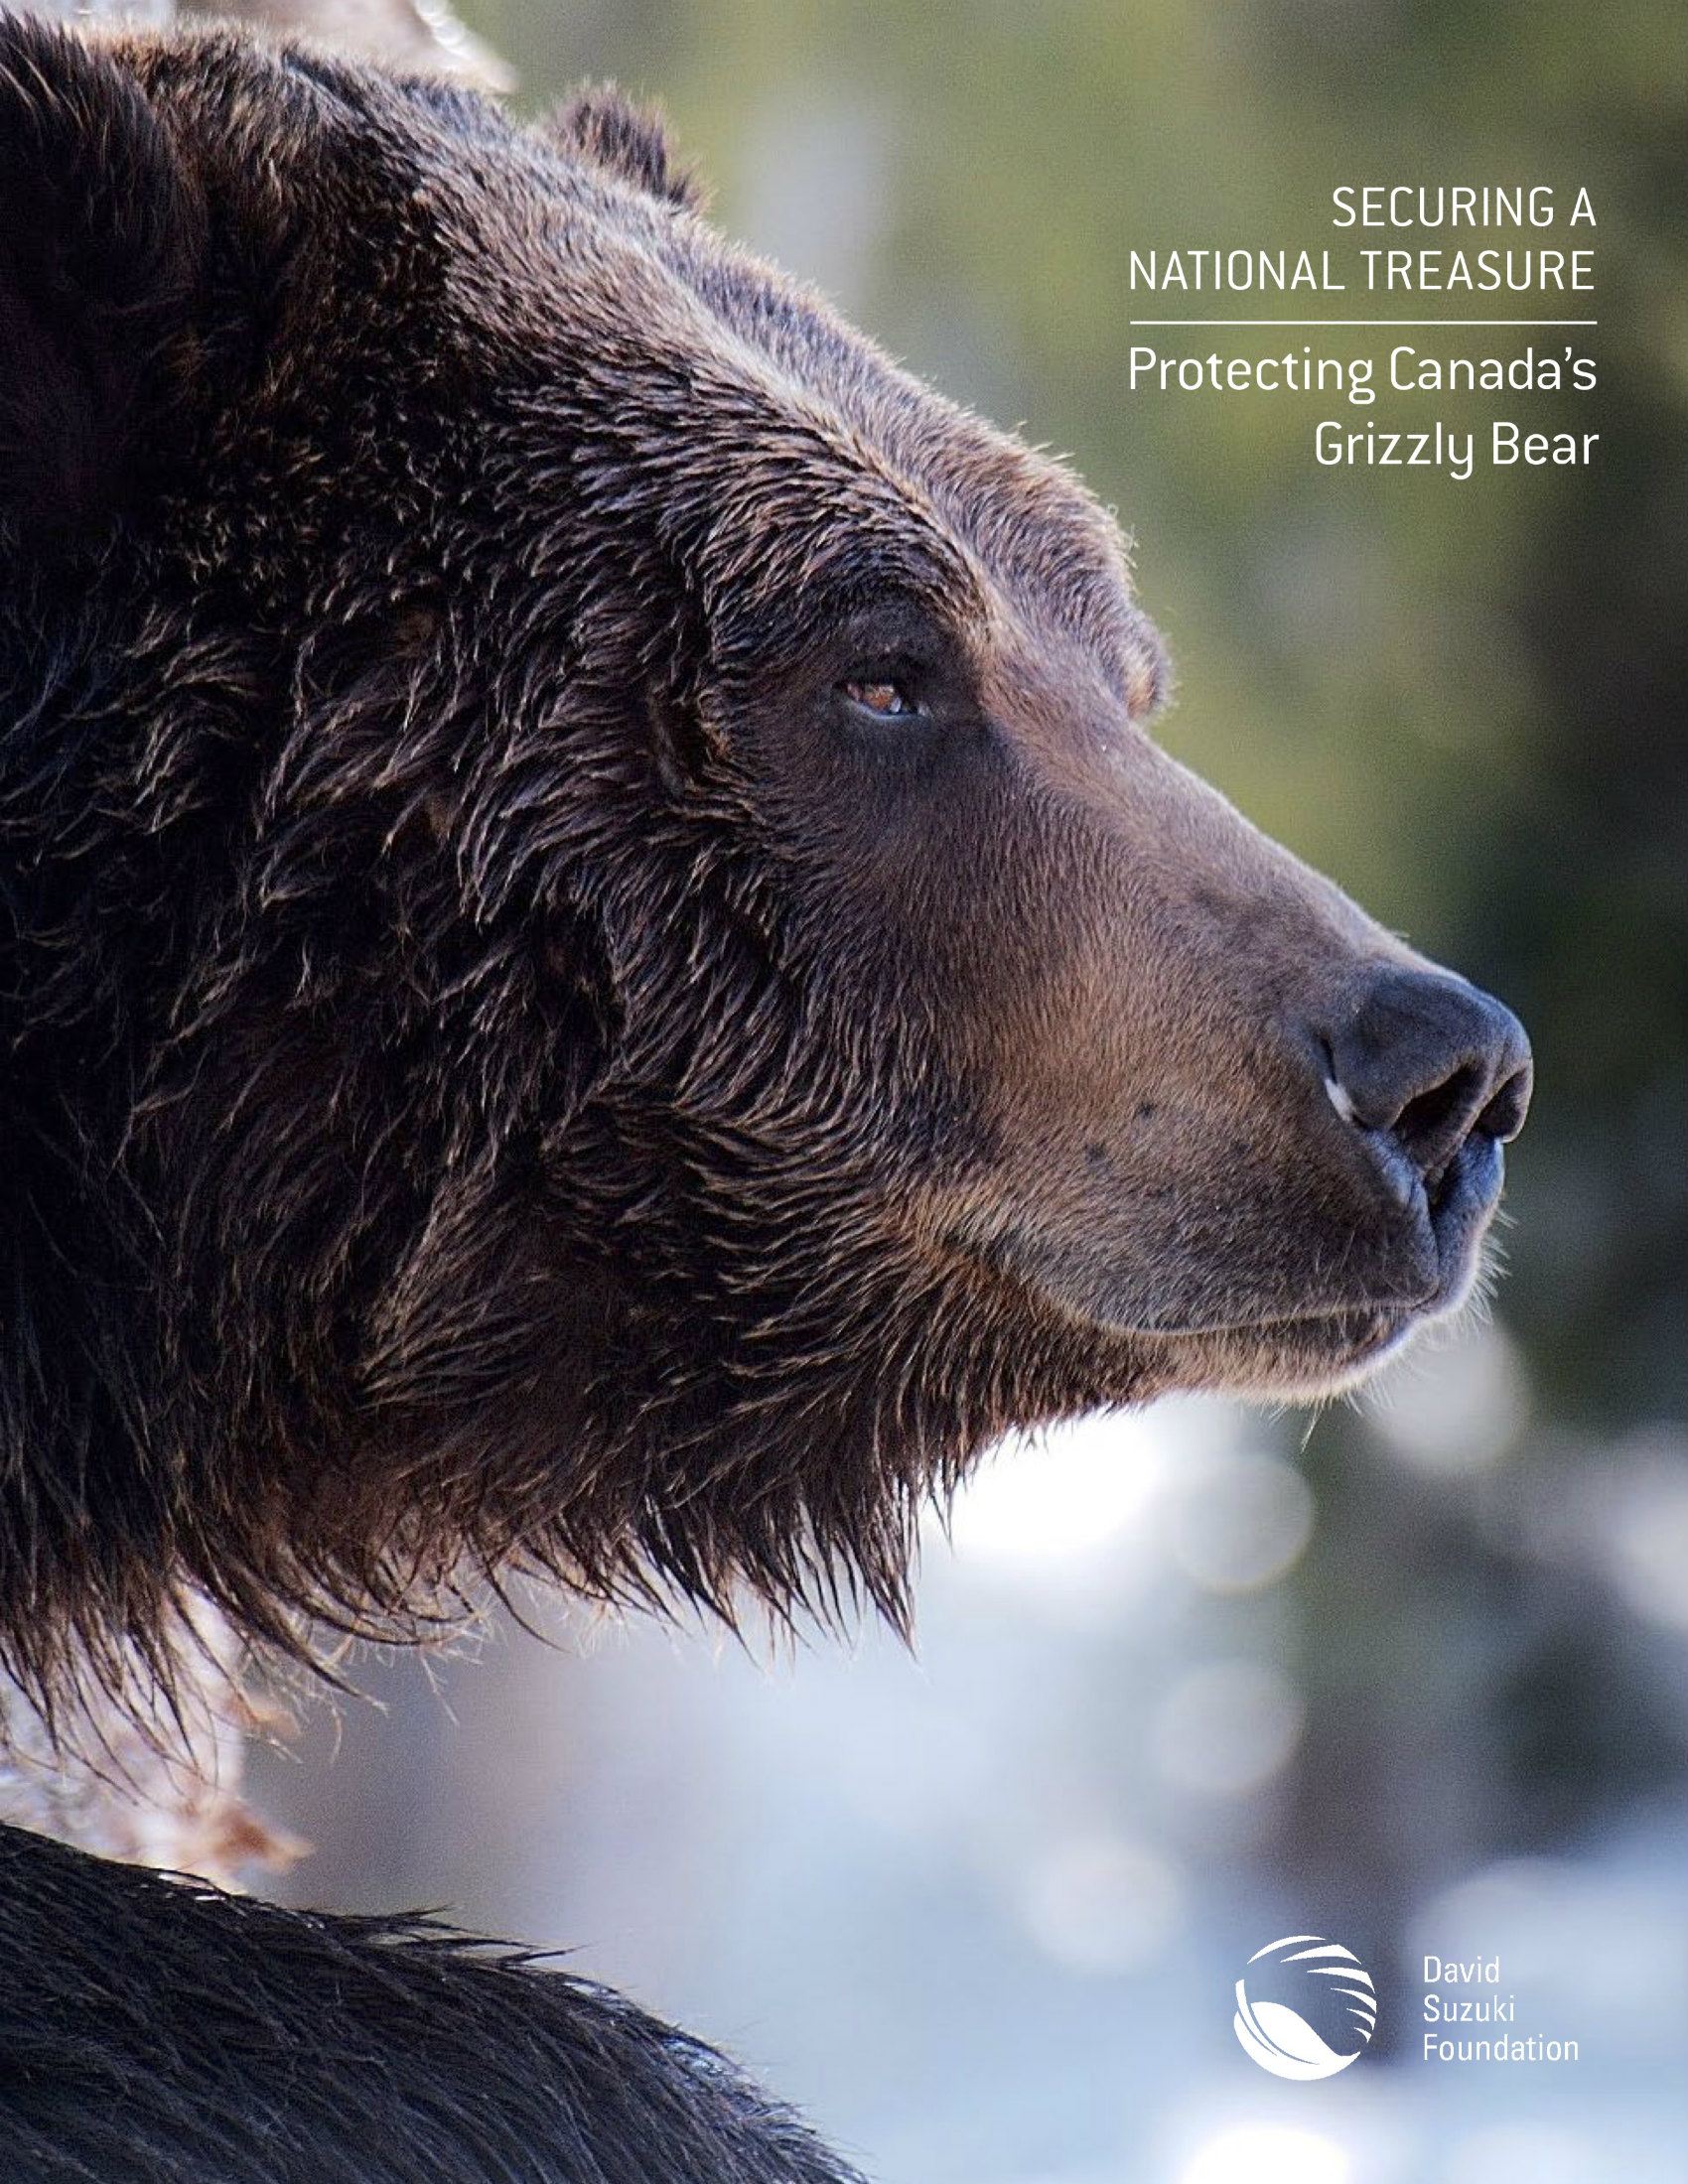 Securing a National Treasure: Protecting Canada's Grizzly Bear